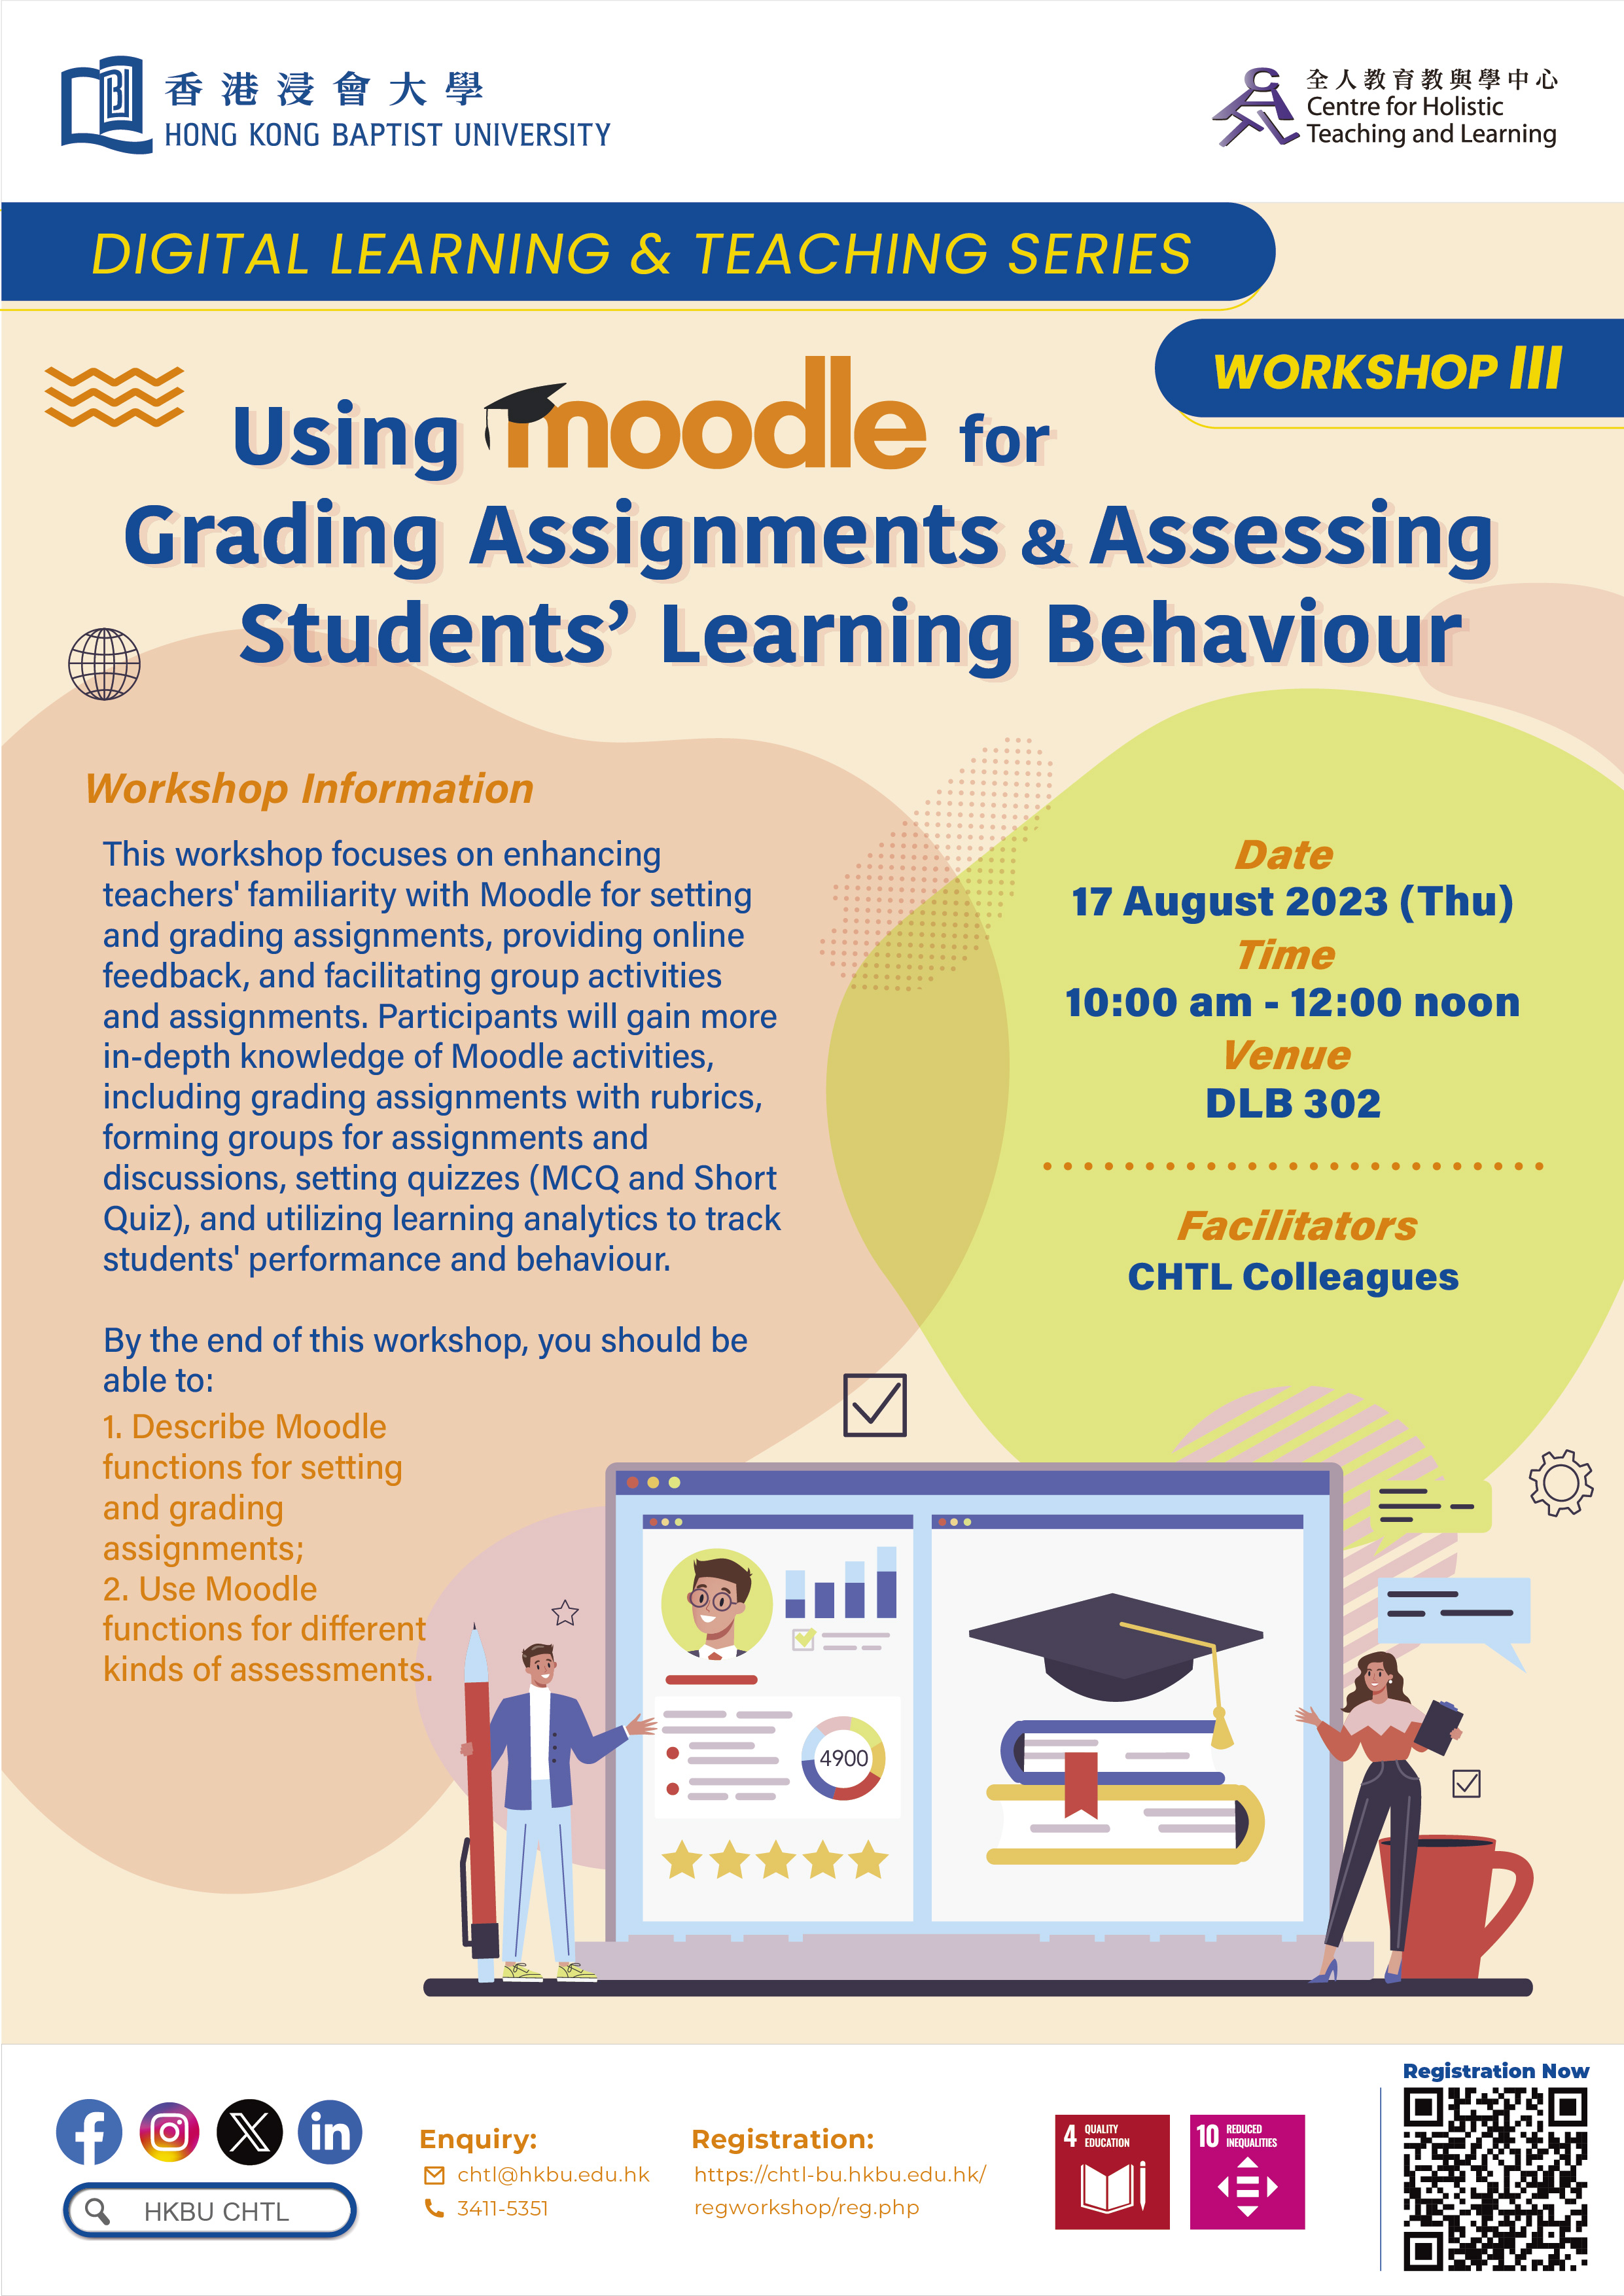 Workshop III: Using Moodle for Grading Assignment & Assessing Students’ Learning Behaviour